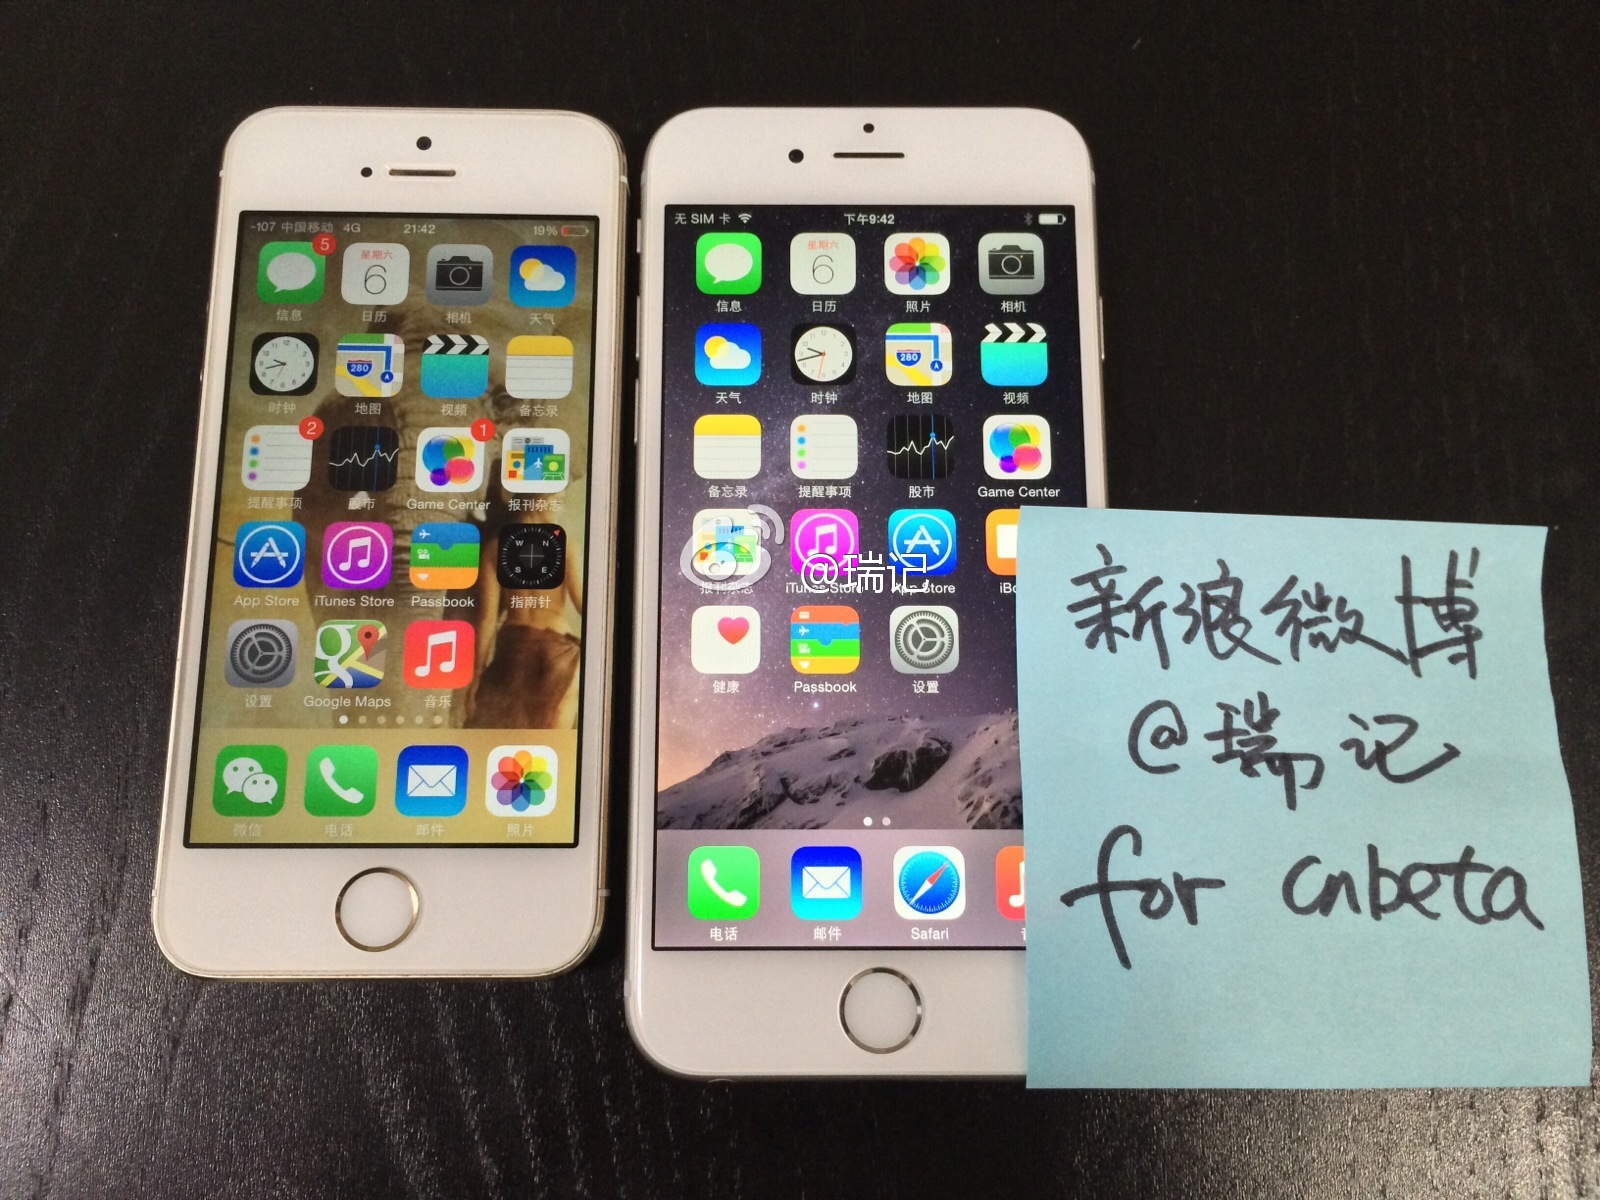 iPhone 6 5 weibo compared